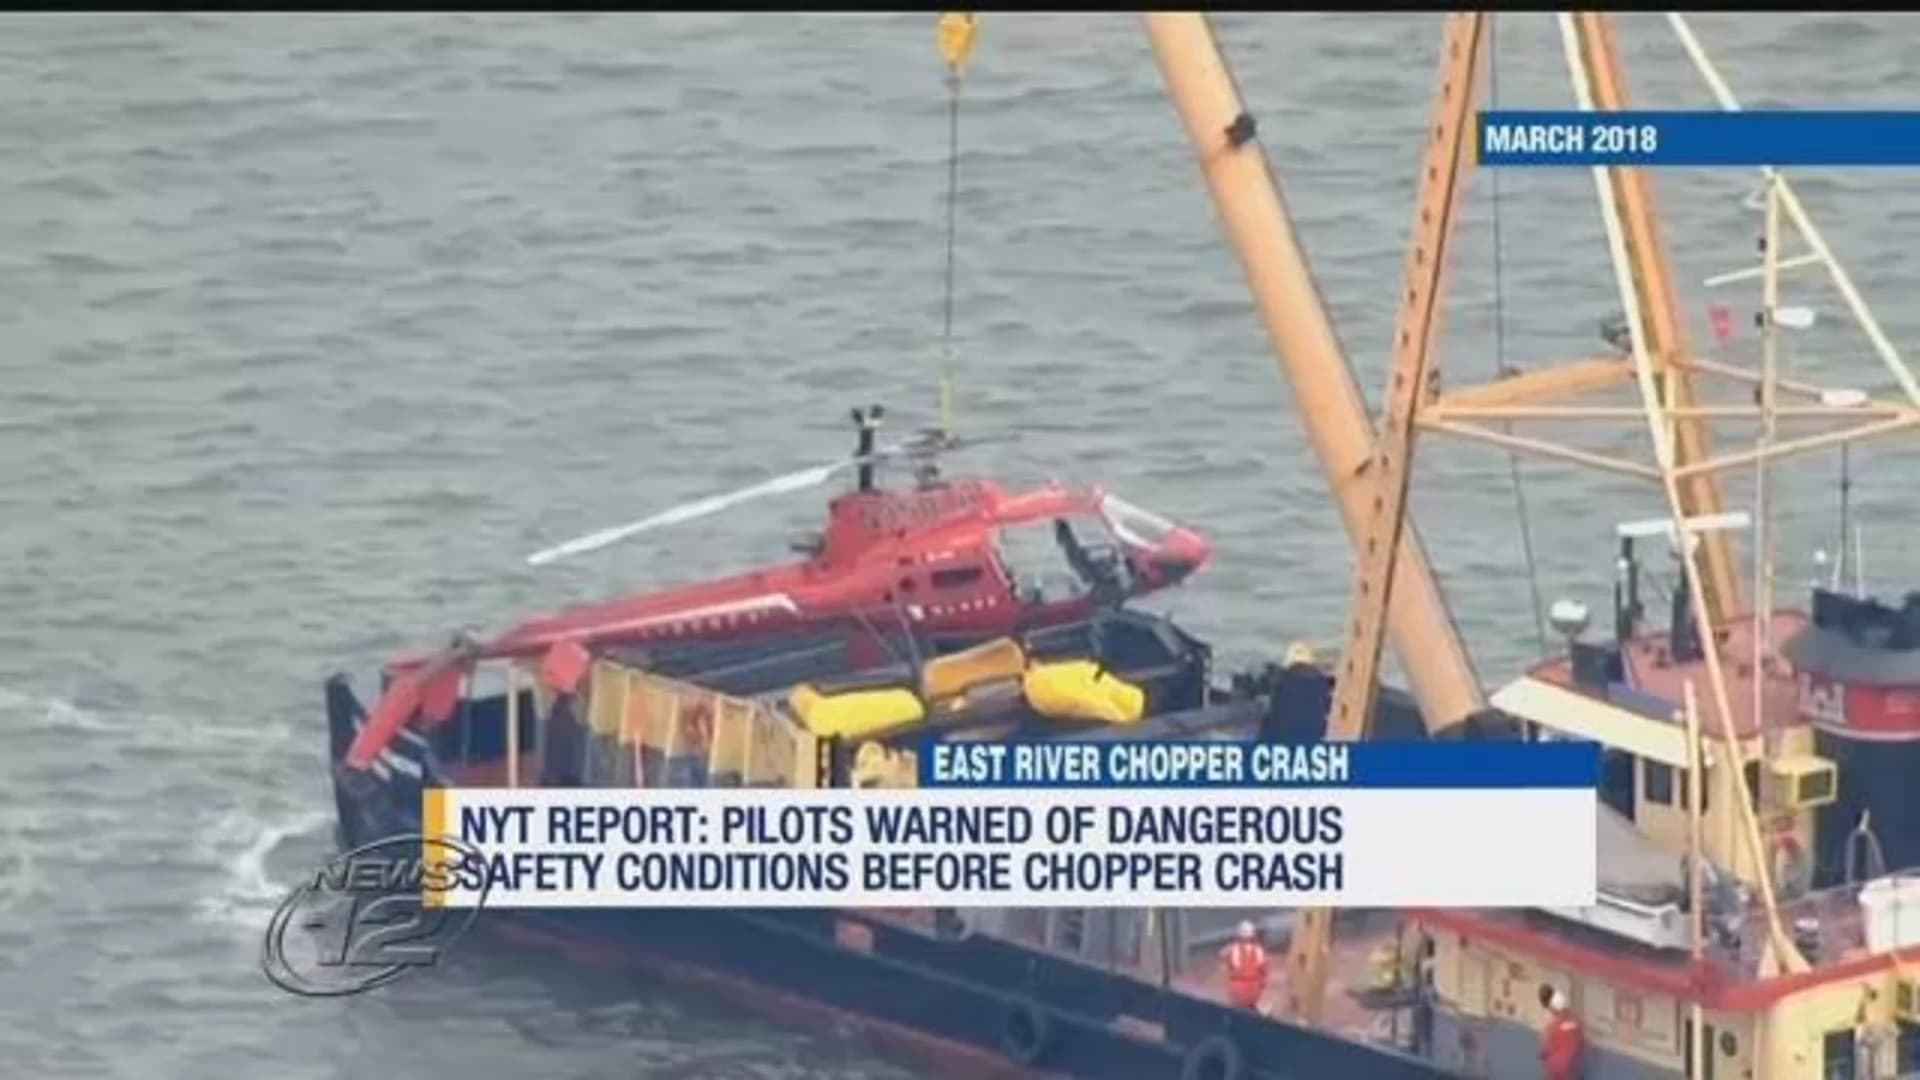 Report: Pilots warned about safety before East River chopper crash